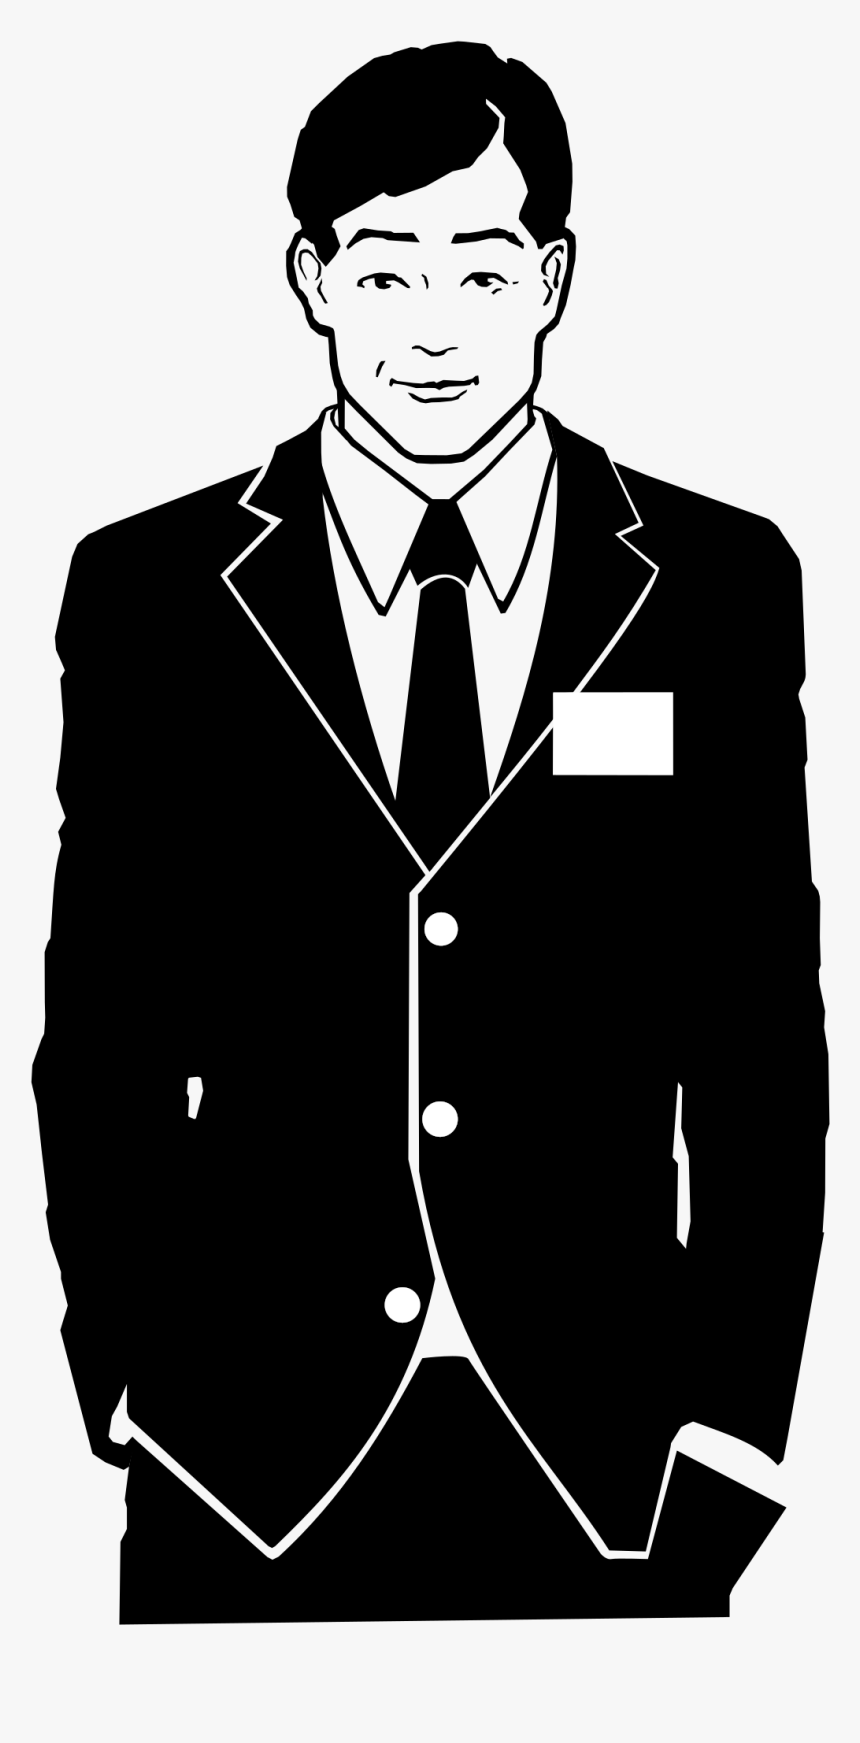 Lds Missionary Big Image - Lds Missionary Png, Transparent Png, Free Download